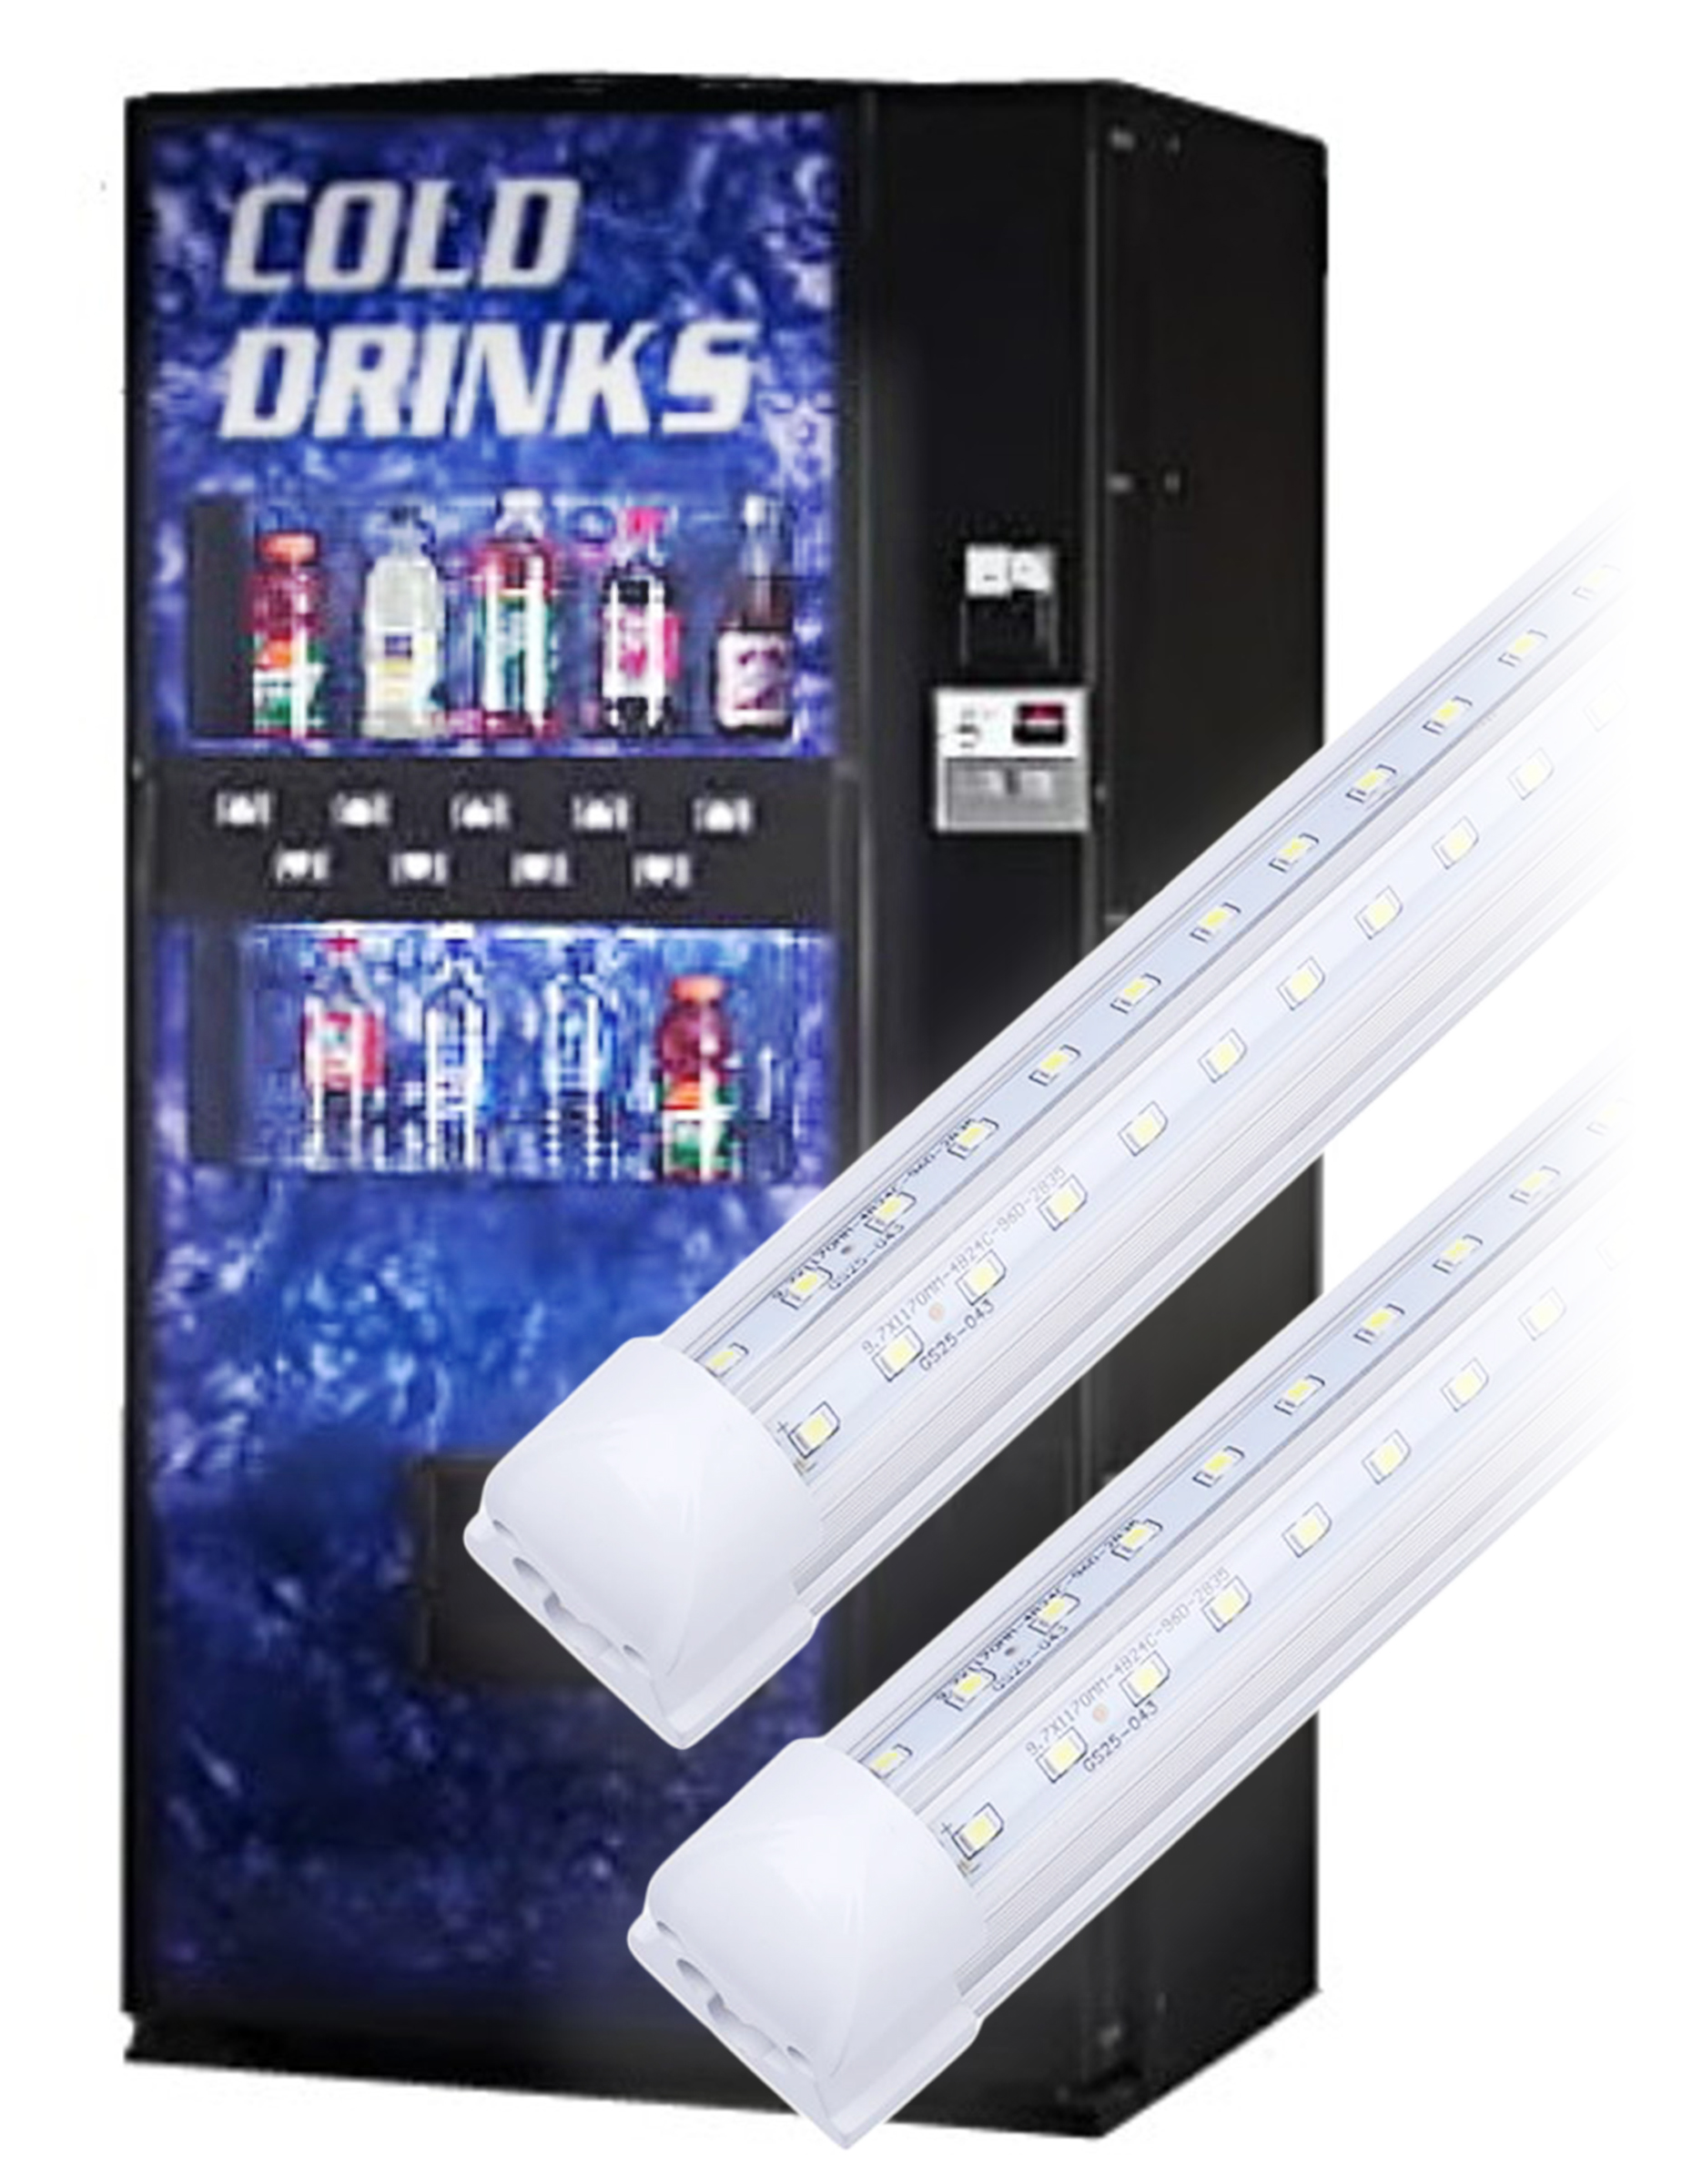 https://www.capitalvending.com/images/product/Dixie%20Narco%20501e%20Live%20Display%20LED%20Plug%20and%20Play%20Light%20Bulb%20Replacement%20Kit.jpg